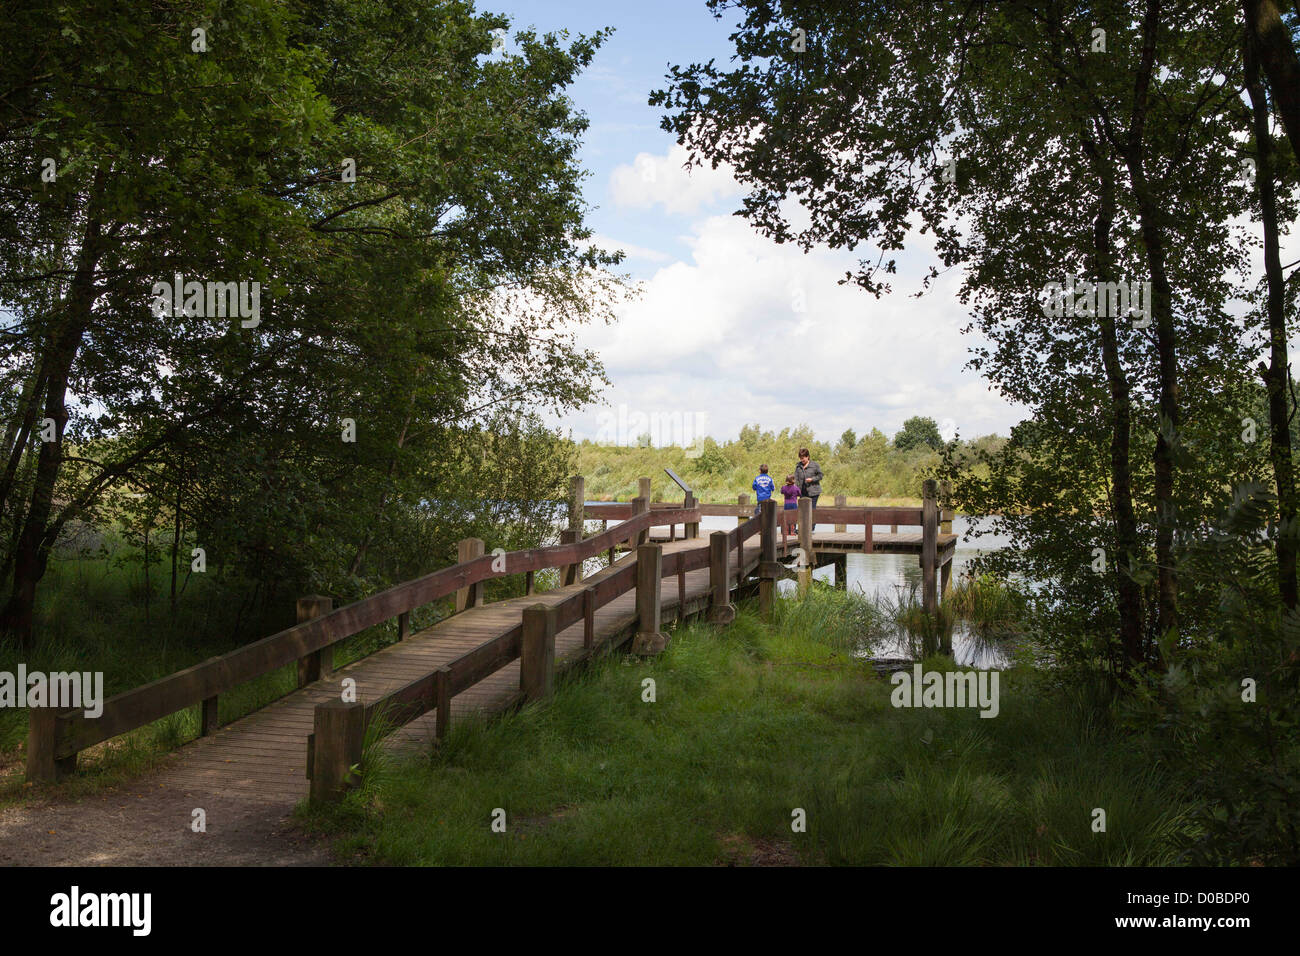 Nationaal Park de Groote Peel with family at jetty in the Netherlands, province Noord-Brabant Stock Photo